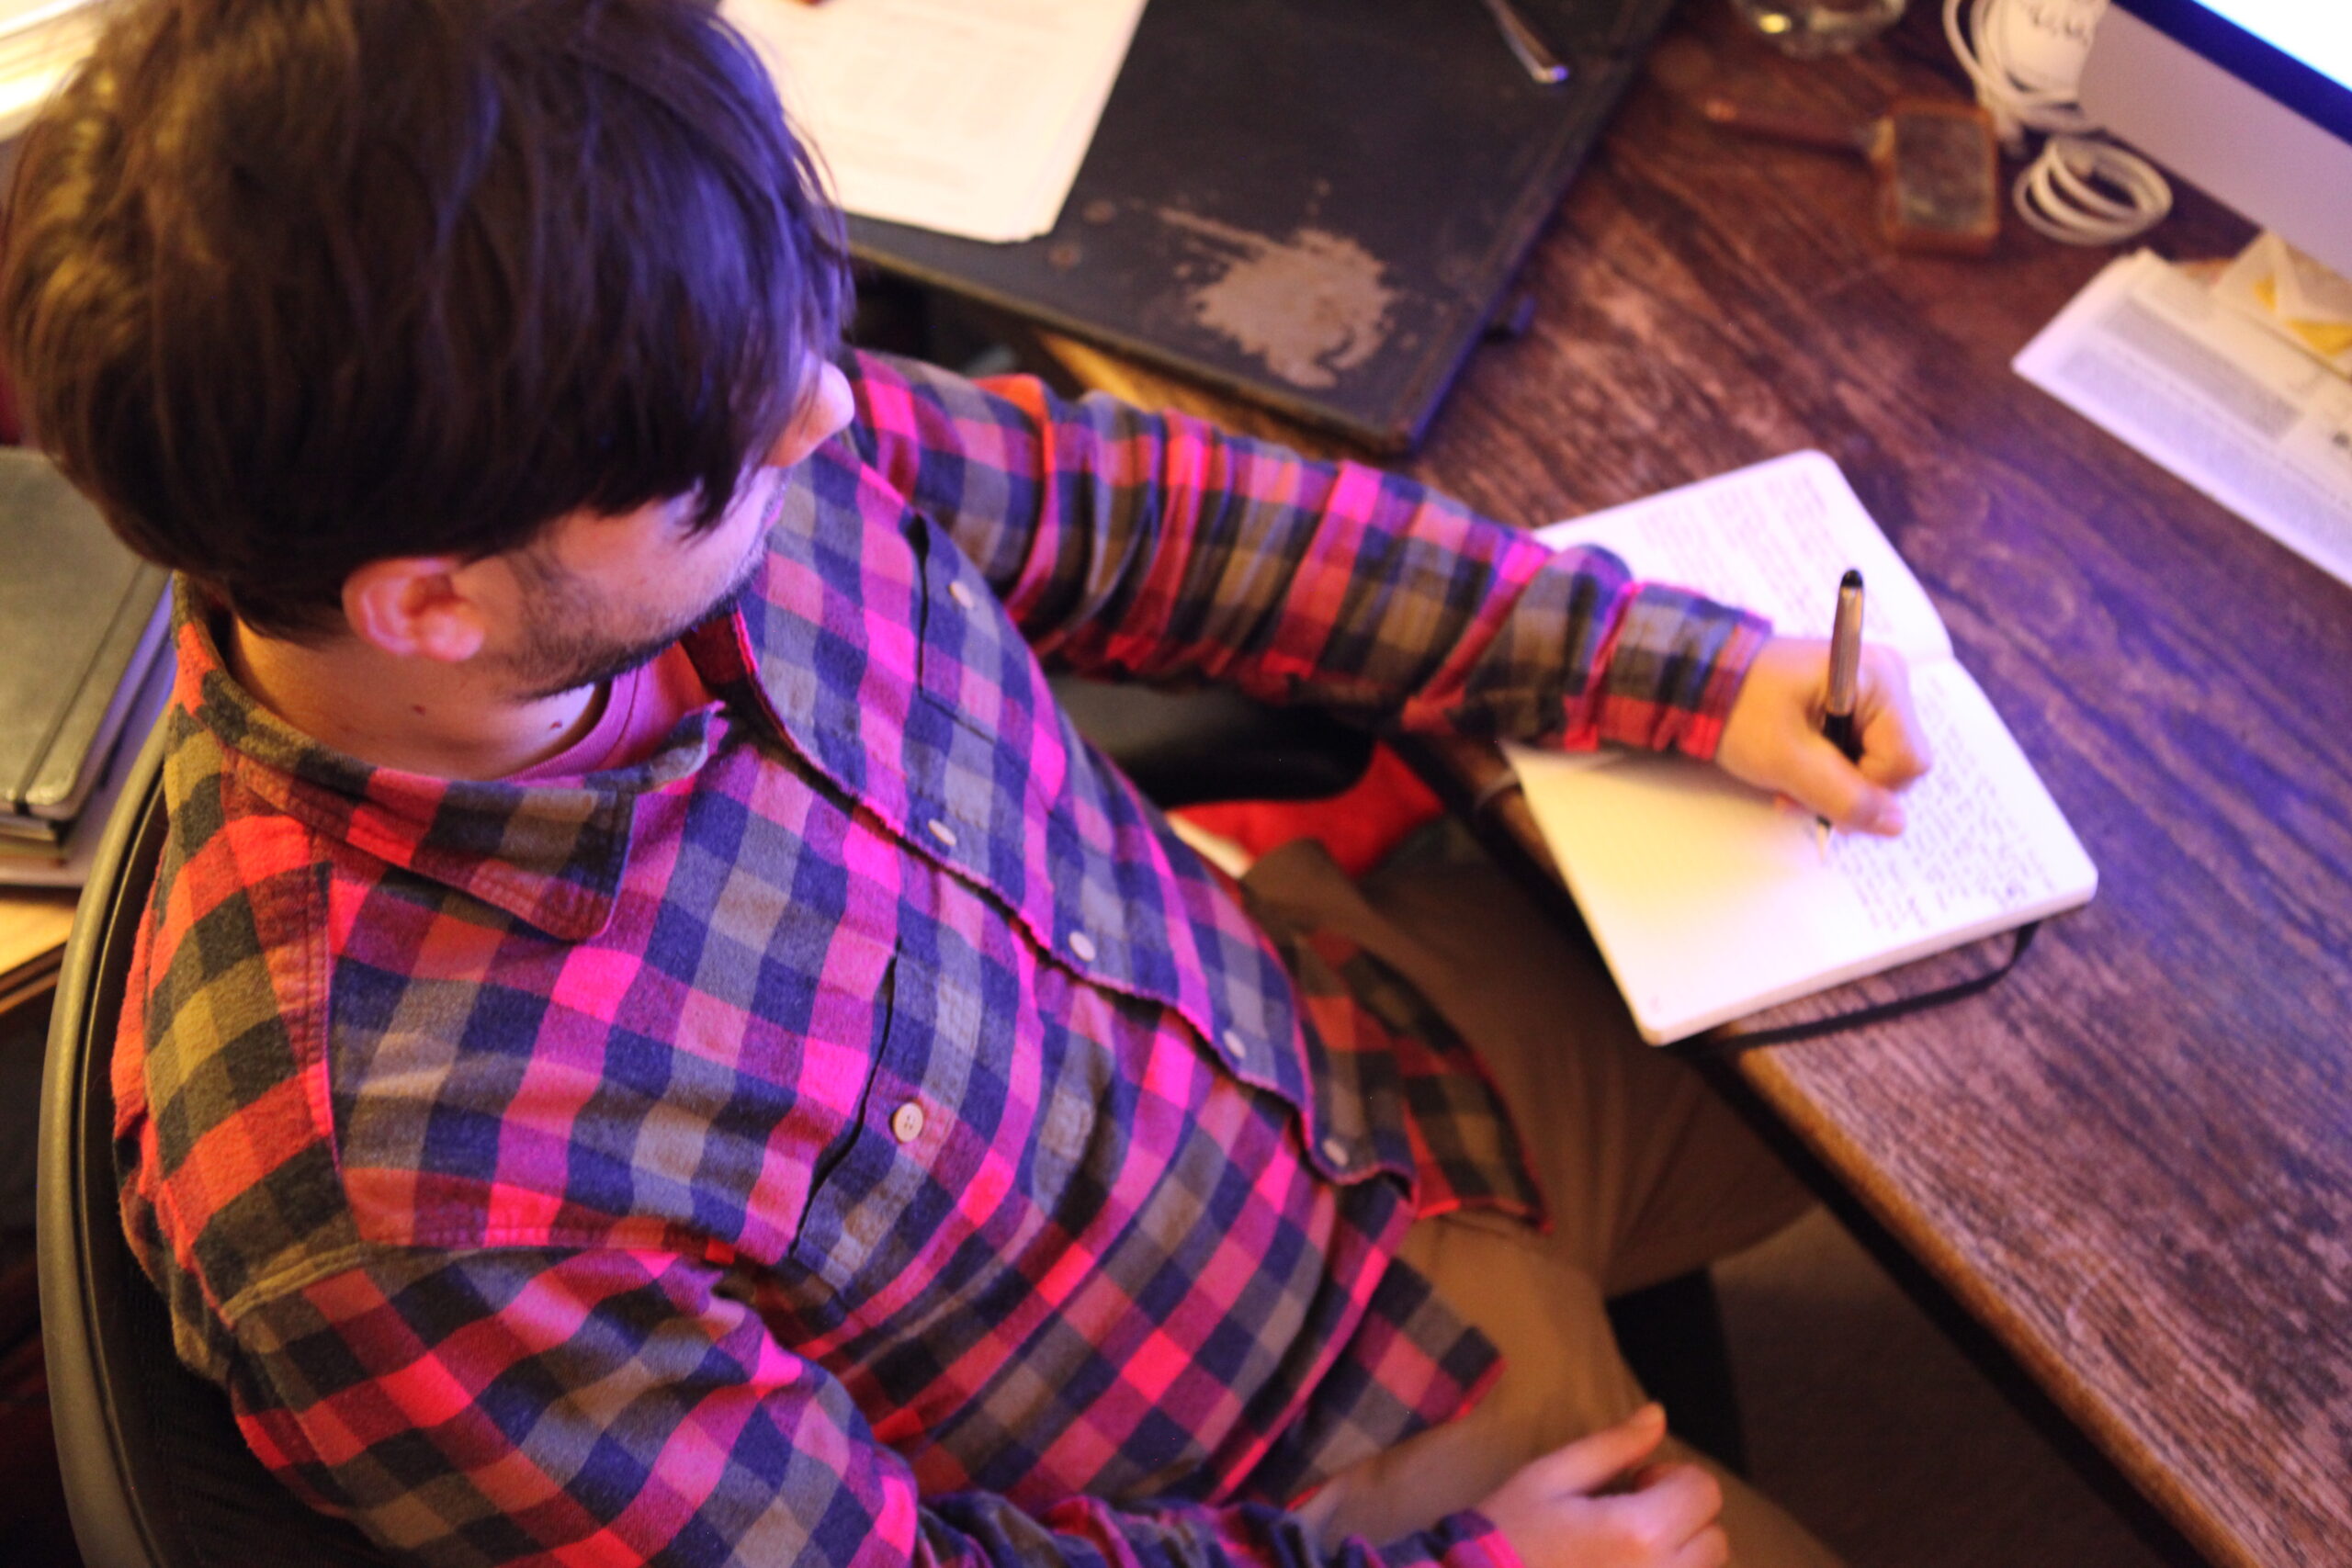 eric shay howard writing in notebook on desk